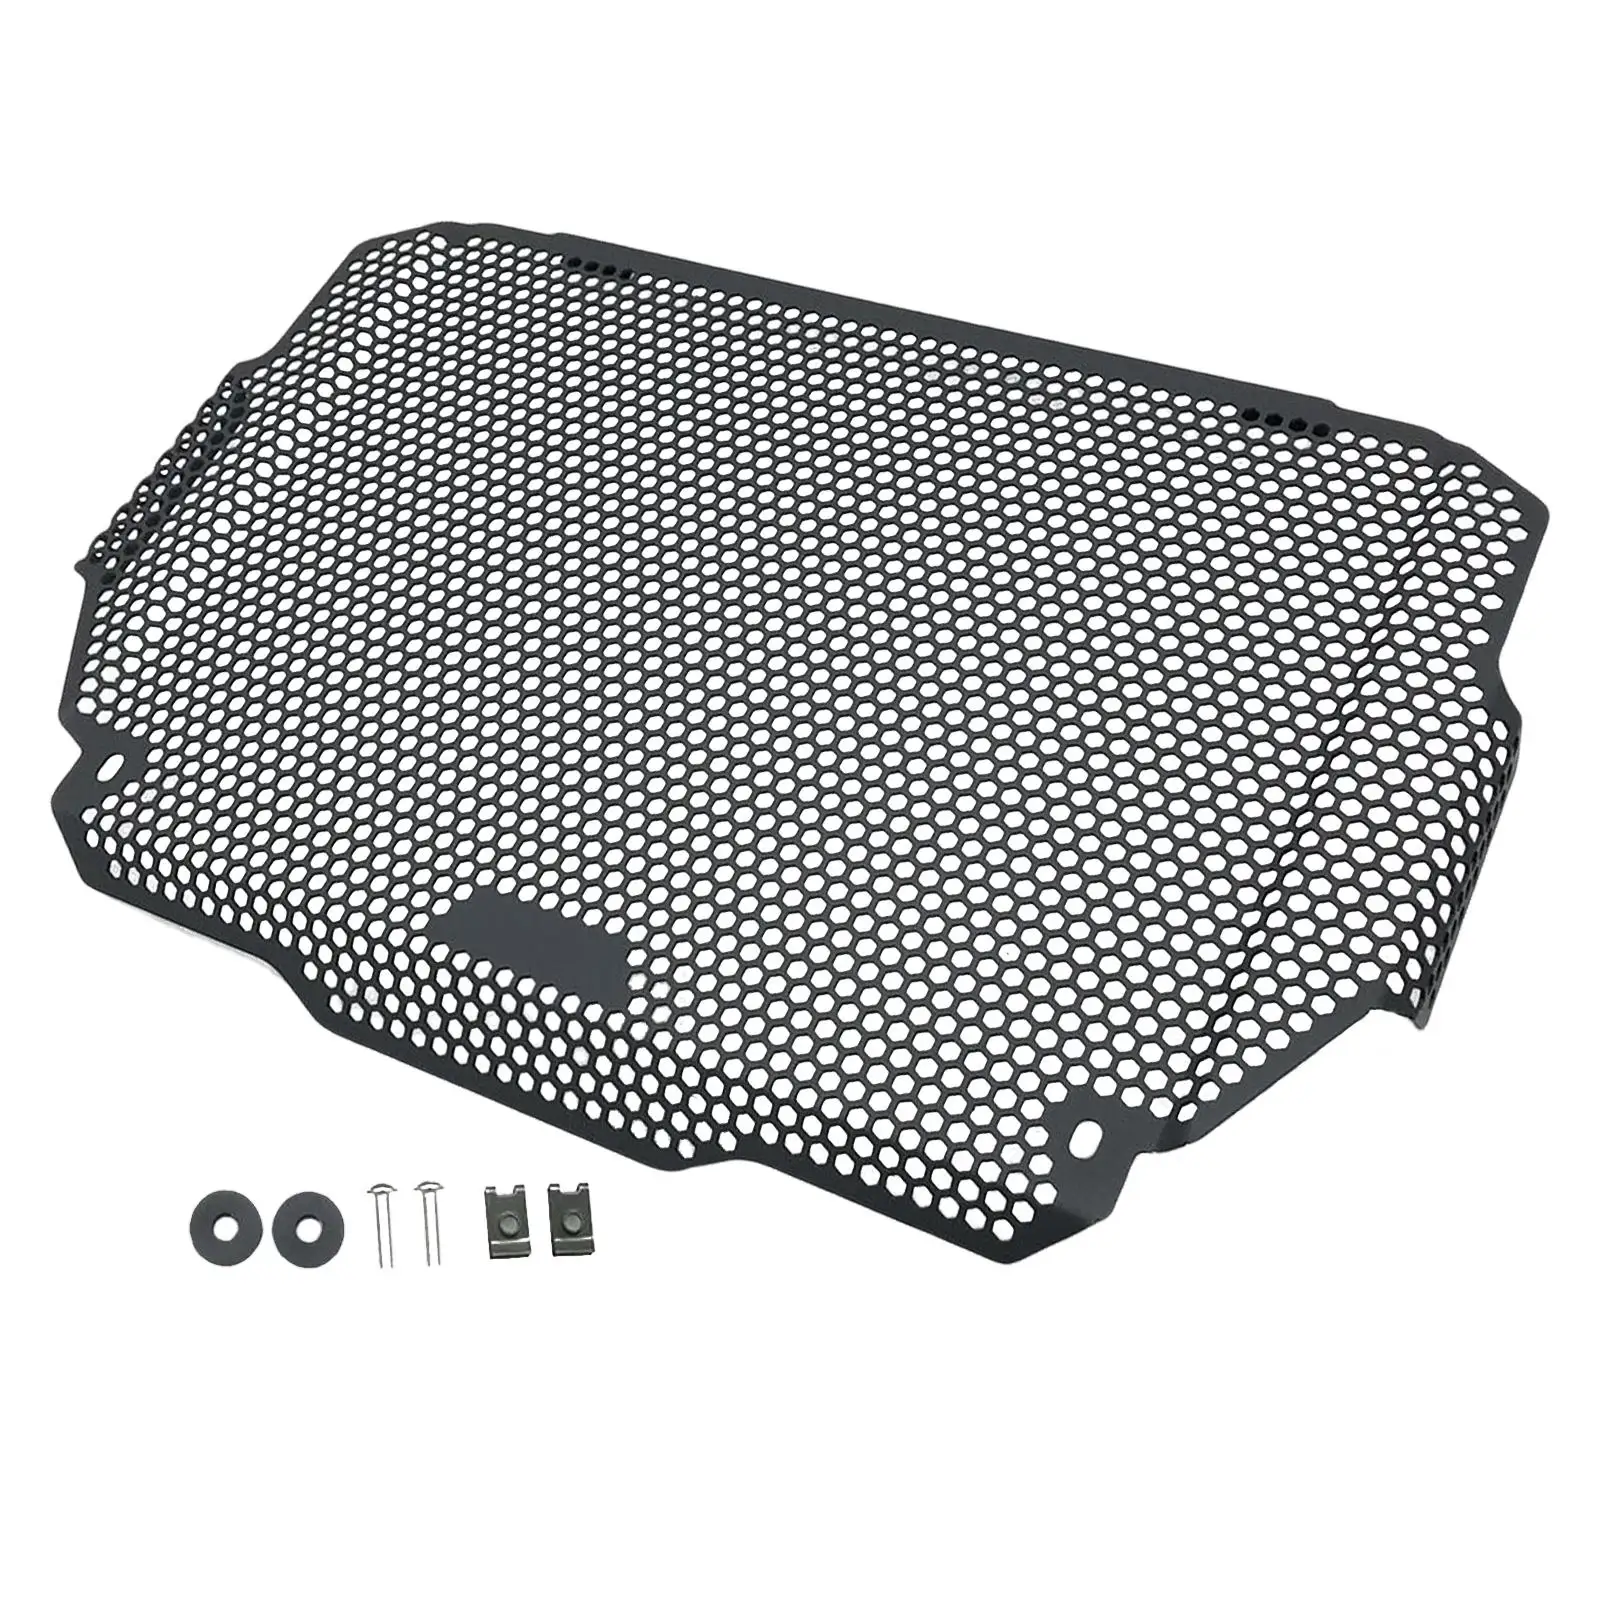 Motorcycle Radiator Guard Lightweight Water Tank Grille Cover Water Tank Cooling Protector for Kawasaki Z900 2017-21 Parts